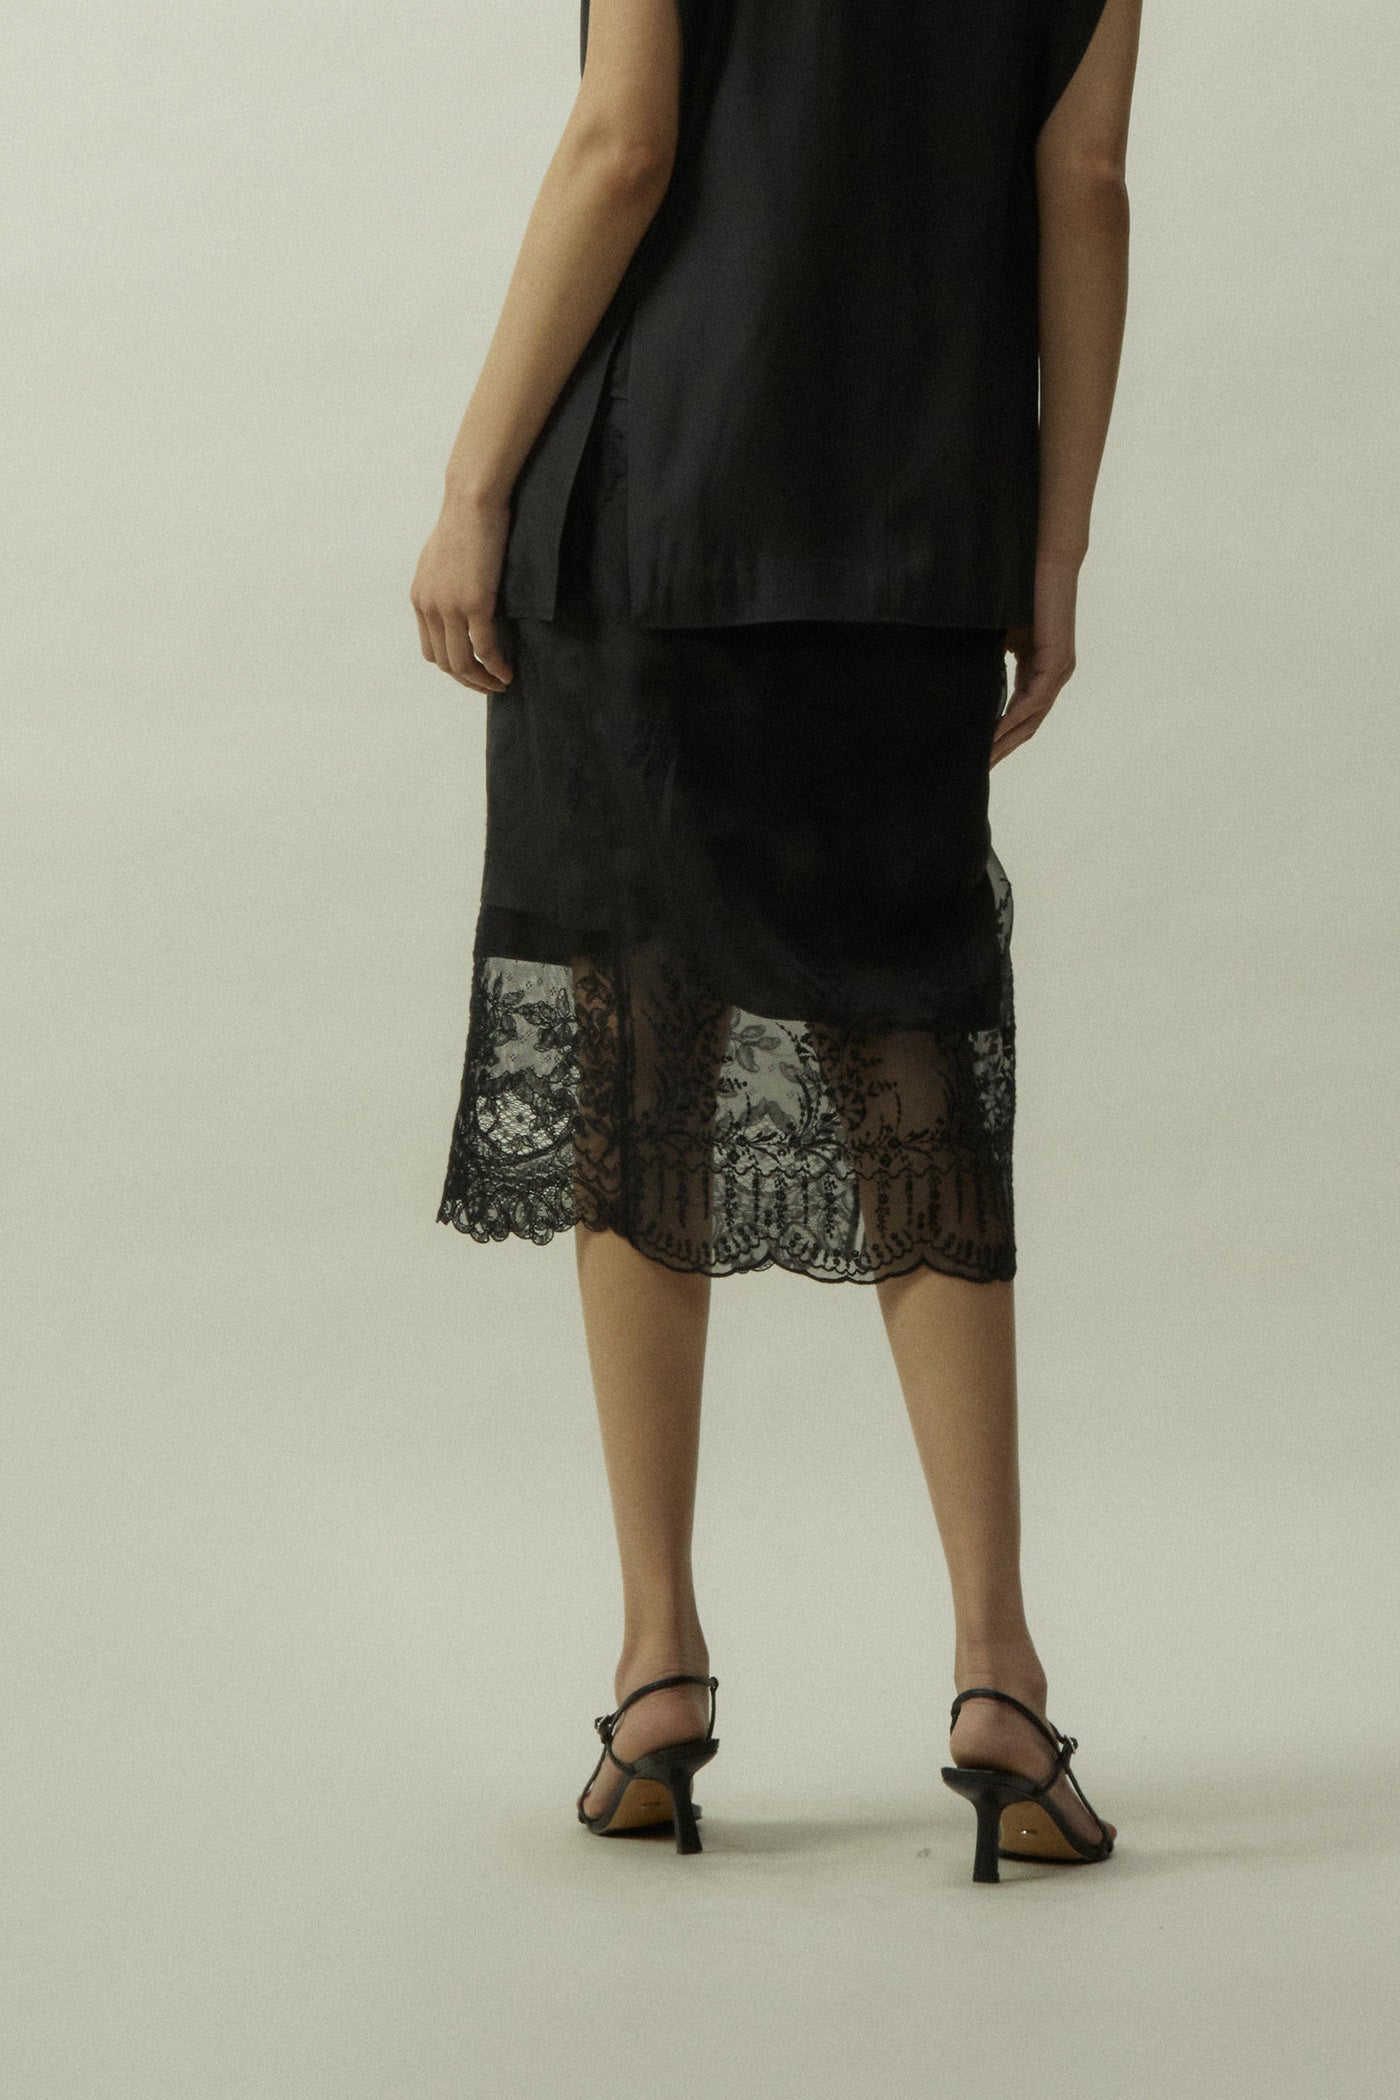 Embroidery Lace Skirt